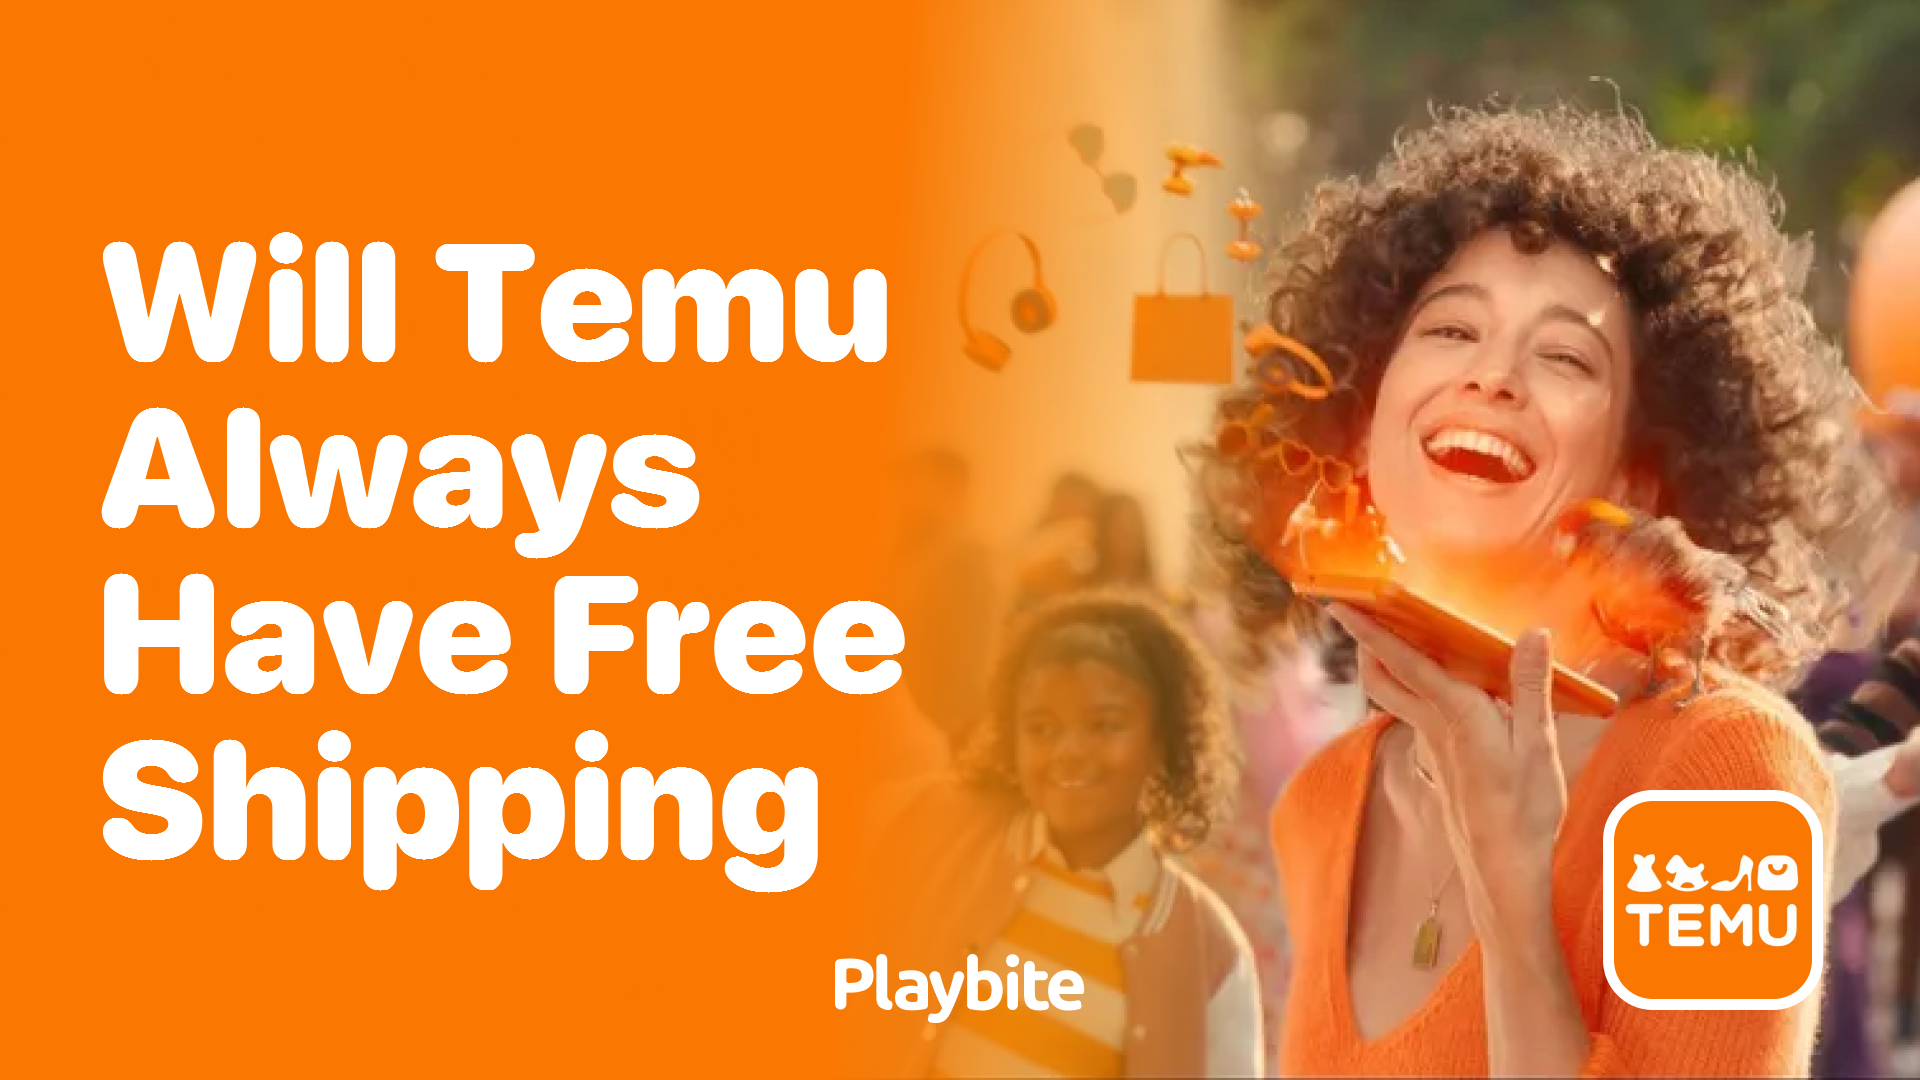 Will Temu Always Offer Free Shipping?